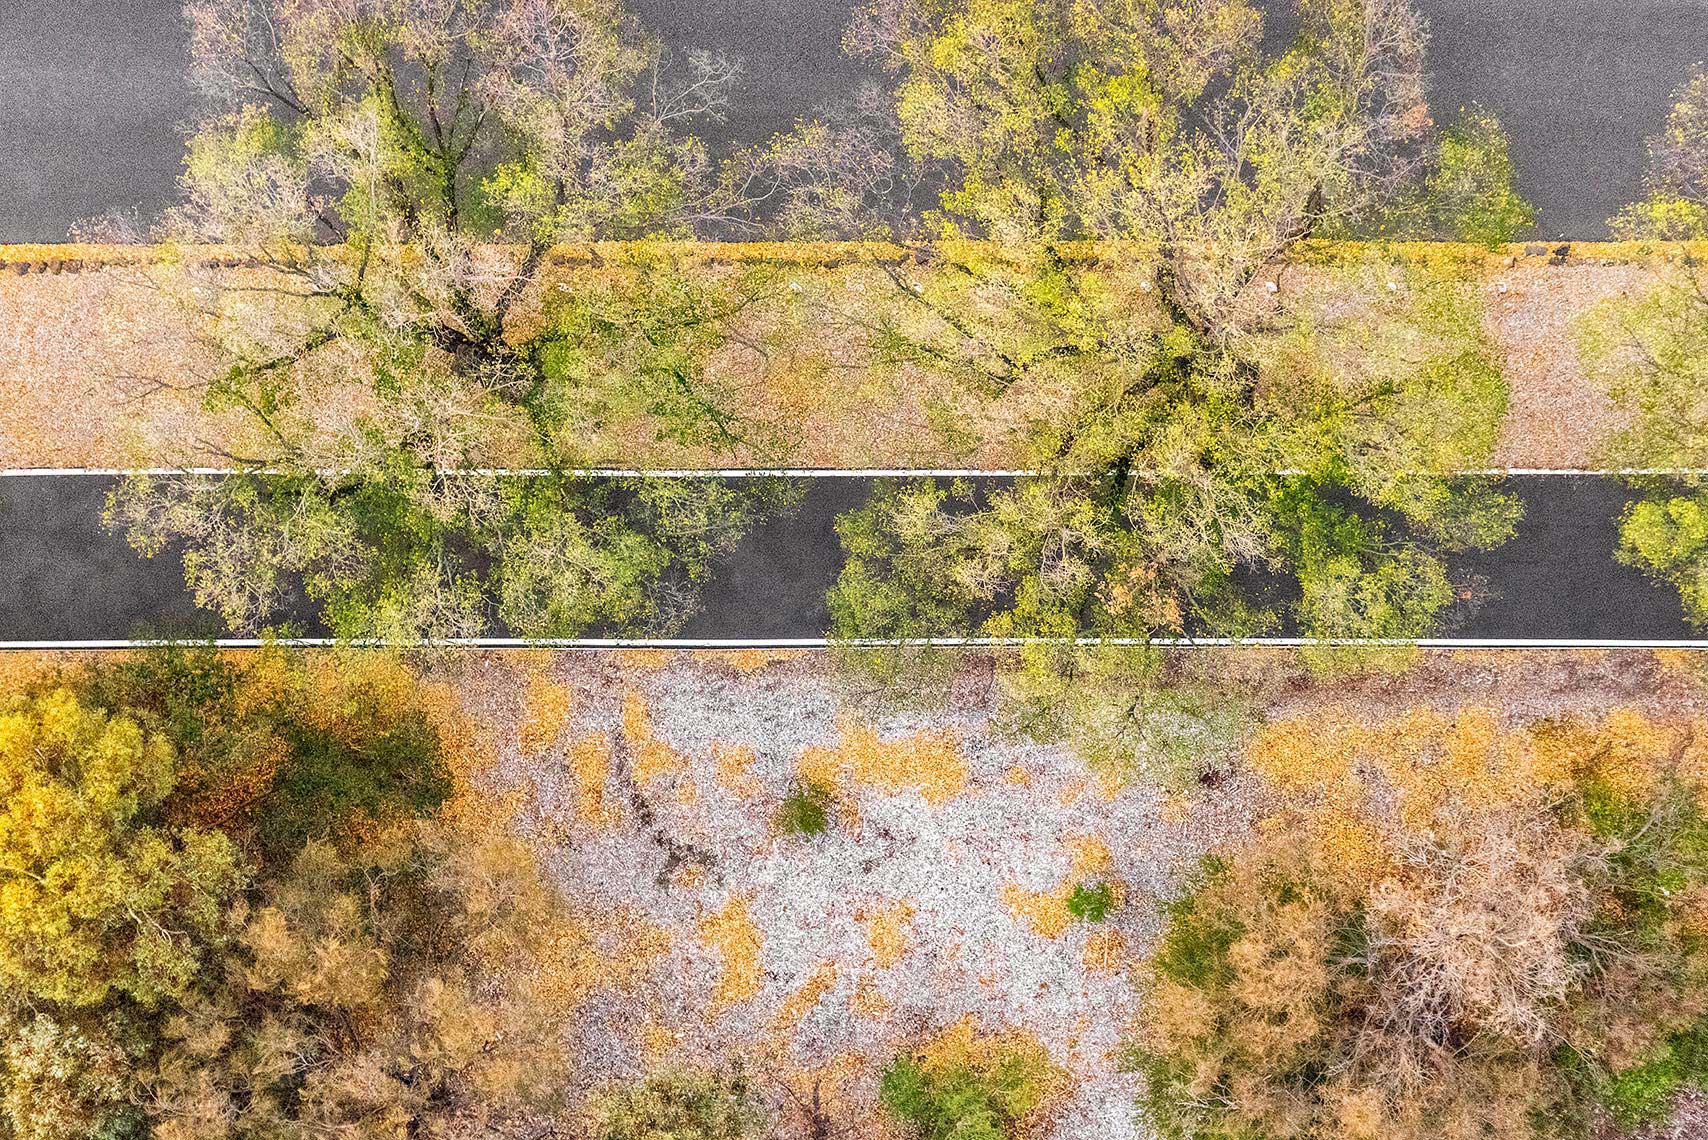 Zoe Wetherall / Aerial Landscape / Autumn Trees